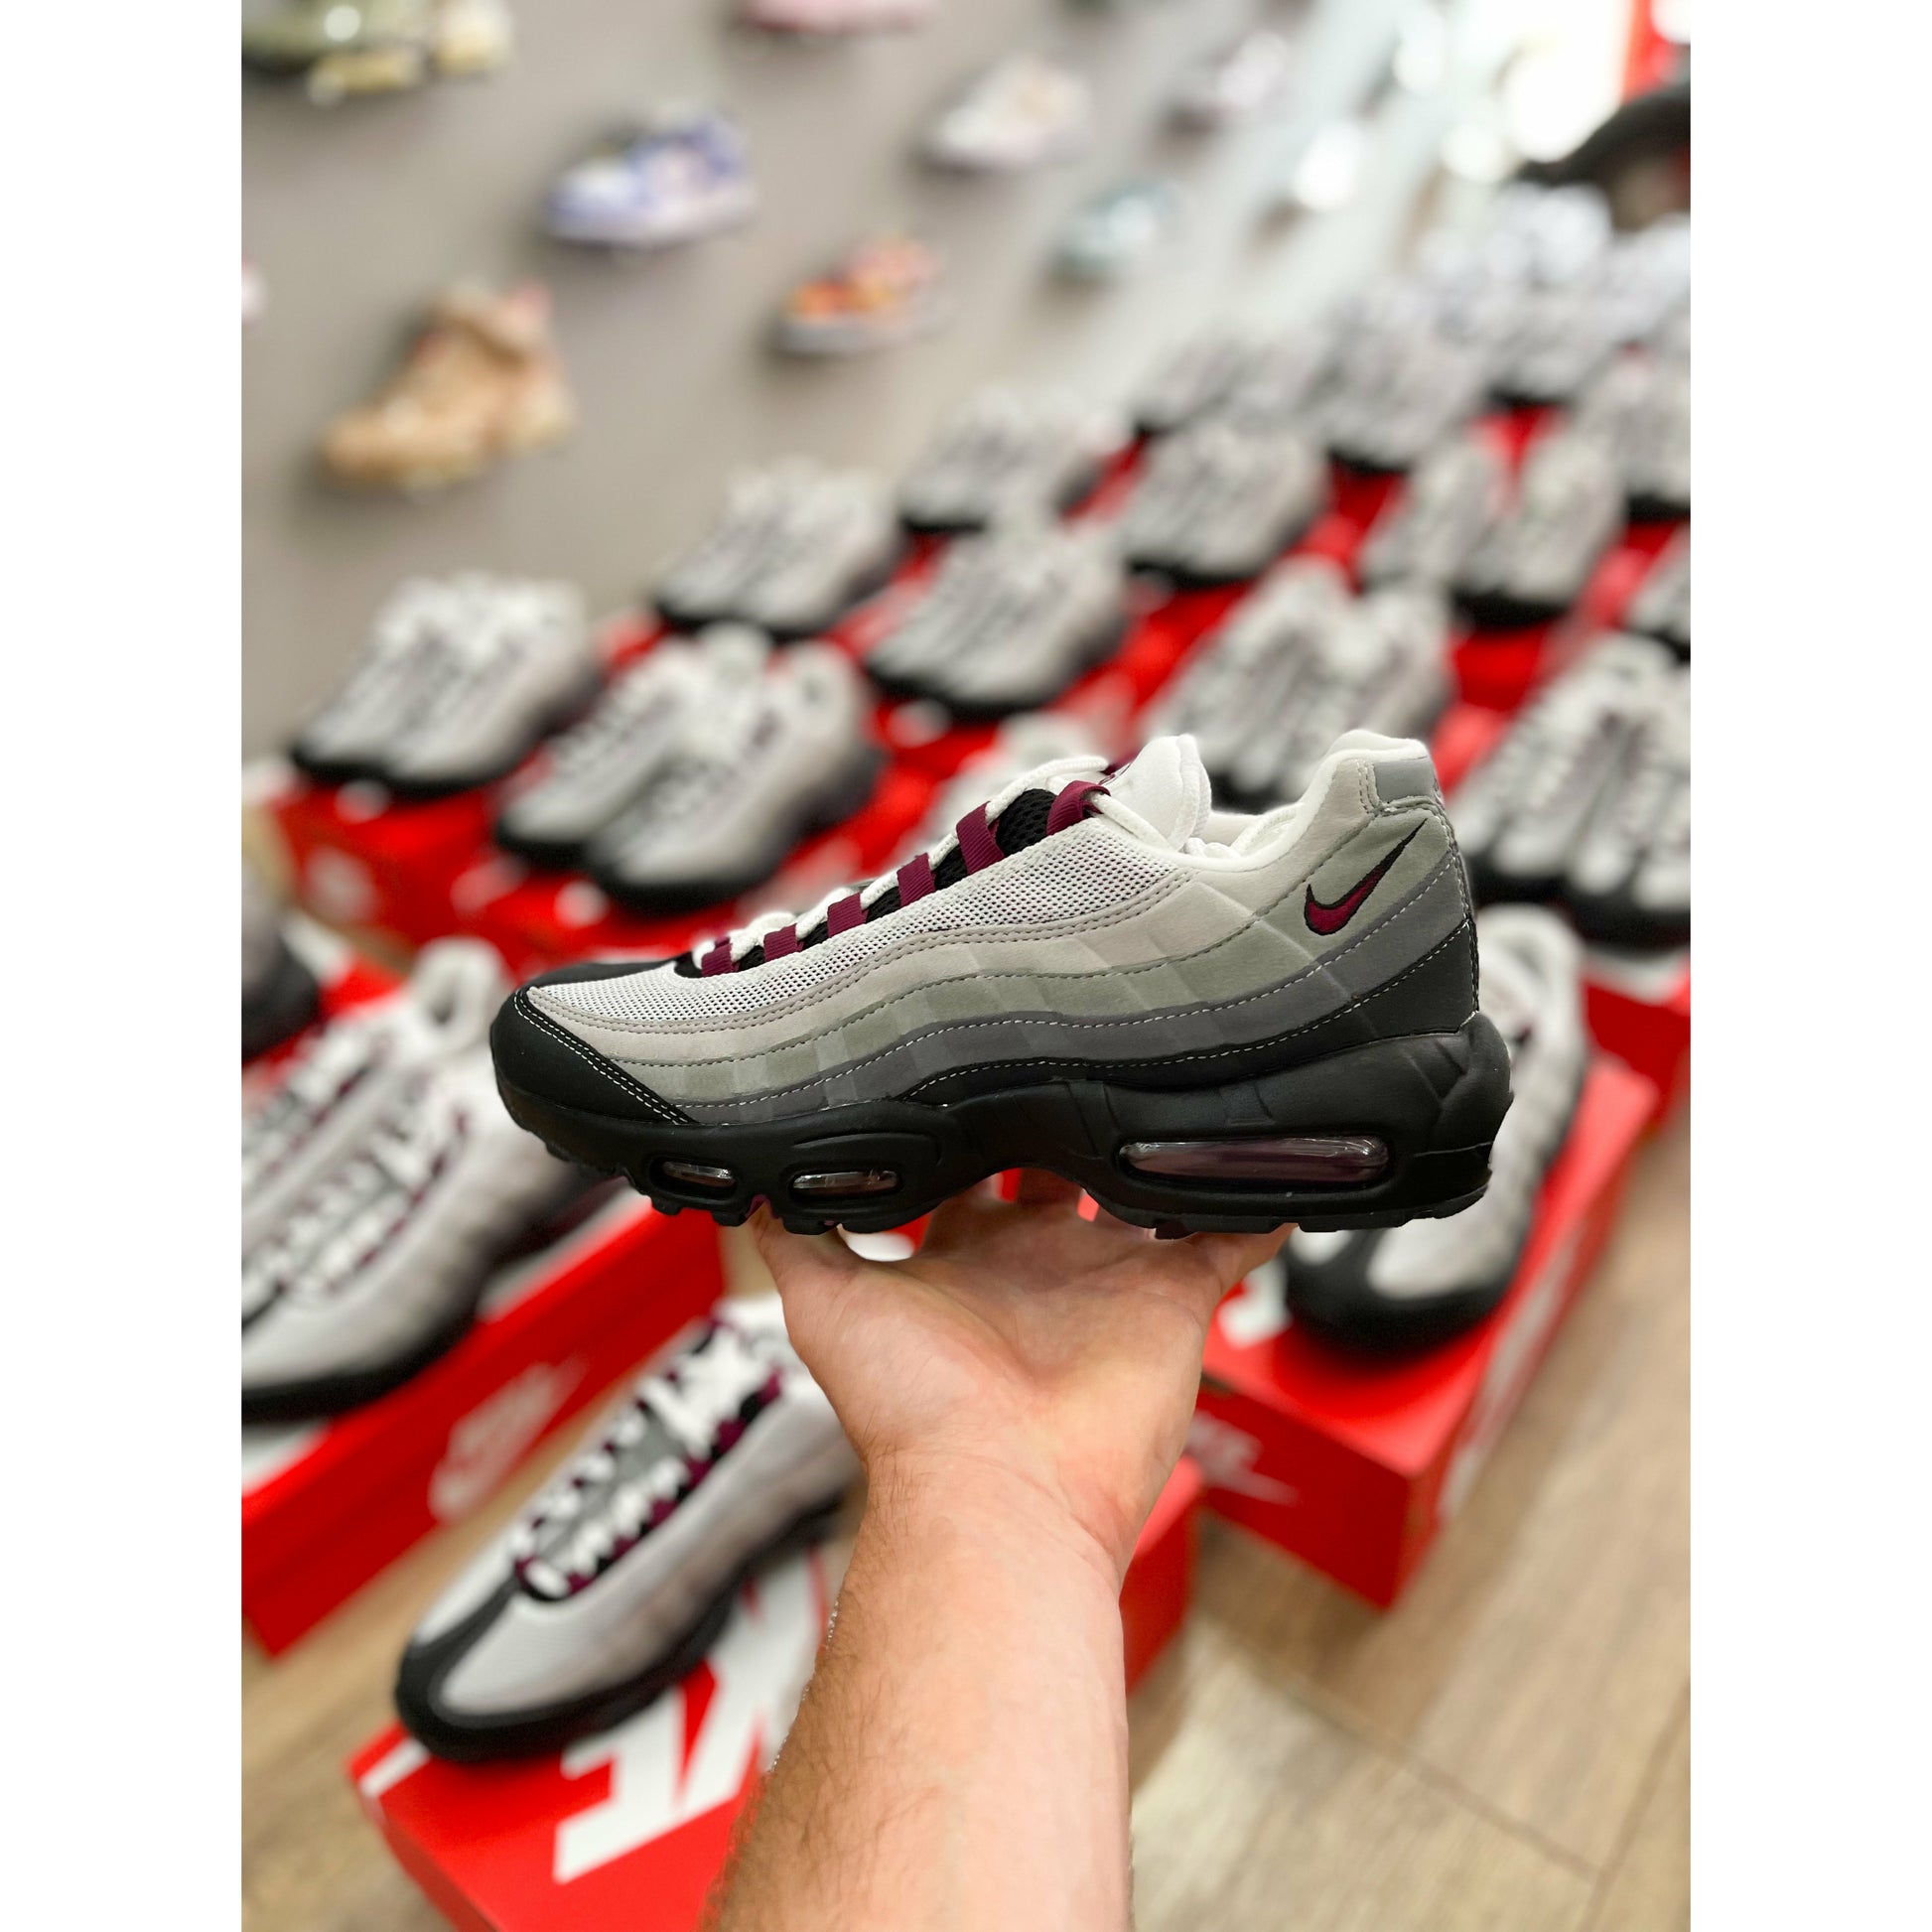 Nike Air Max 95 OG Beetroot from Nike